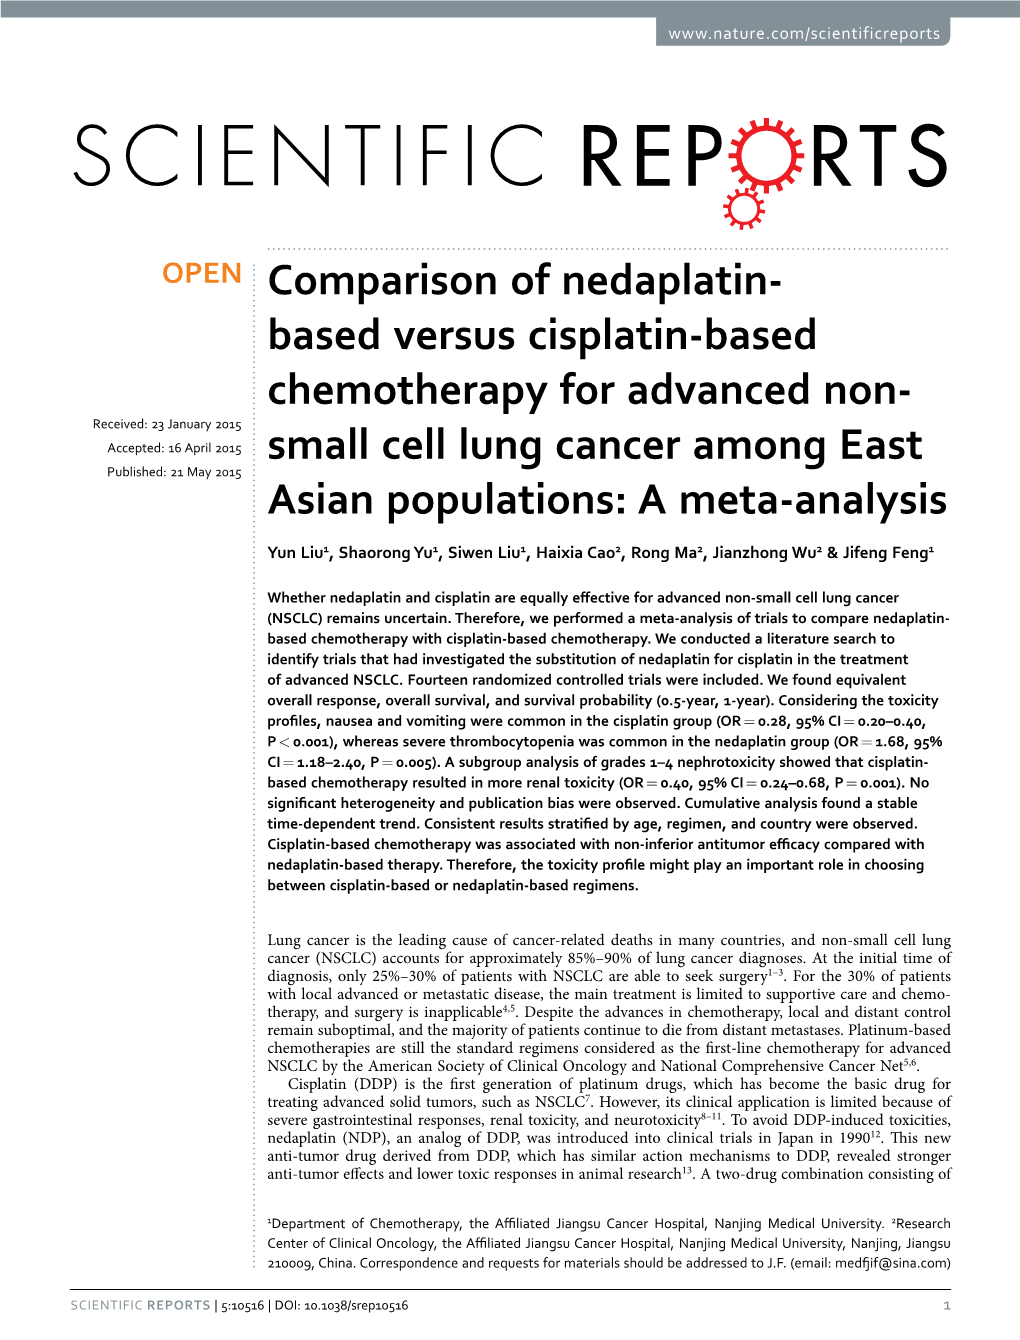 Comparison of Nedaplatin-Based Versus Cisplatin-Based Chemotherapy for Advanced Non-Small Cell Lung Cancer Among East Asian Populations: a Meta-Analysis